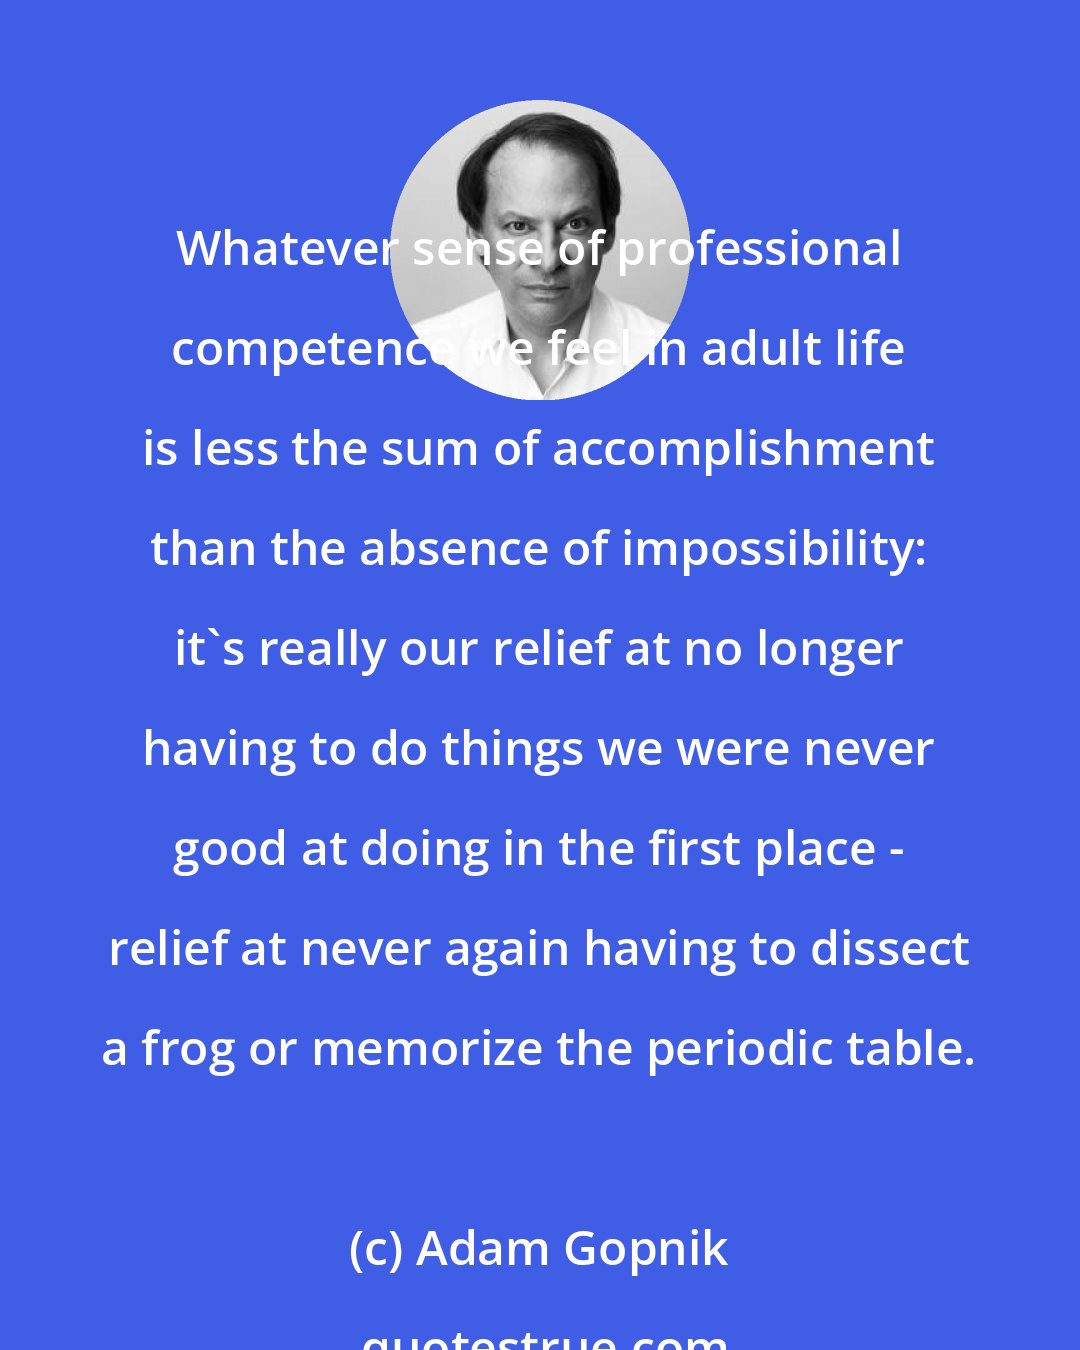 Adam Gopnik: Whatever sense of professional competence we feel in adult life is less the sum of accomplishment than the absence of impossibility: it's really our relief at no longer having to do things we were never good at doing in the first place - relief at never again having to dissect a frog or memorize the periodic table.